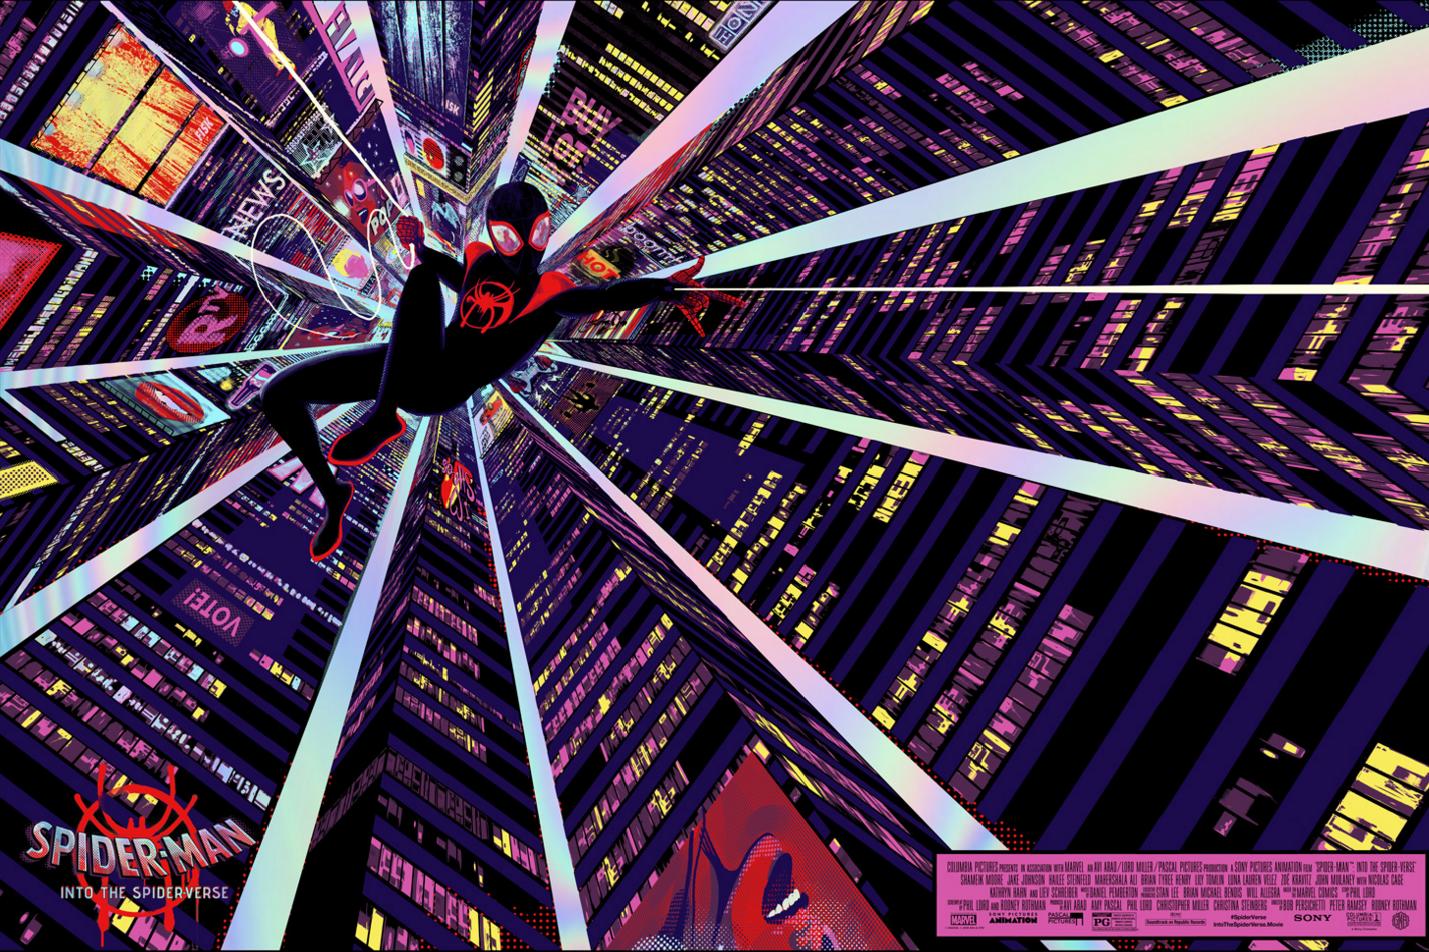 Spider-Man: Into the Spider-Verse Thornley (Foil Edition Print), Chris Thornley